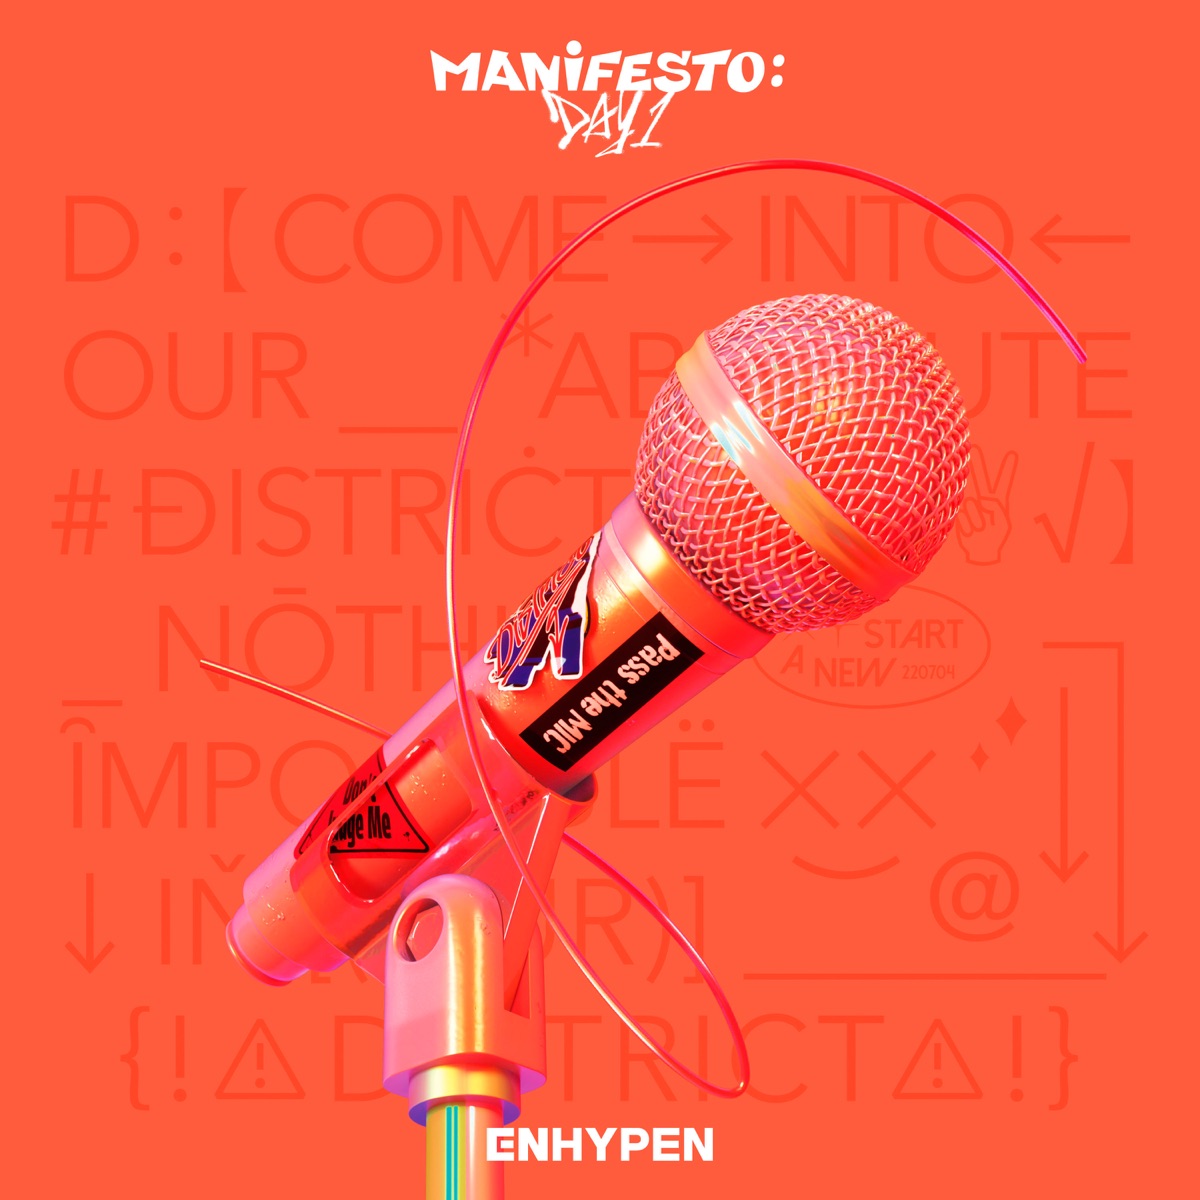 Cover art for『ENHYPEN - Foreshadow』from the release『MANIFESTO : DAY 1』